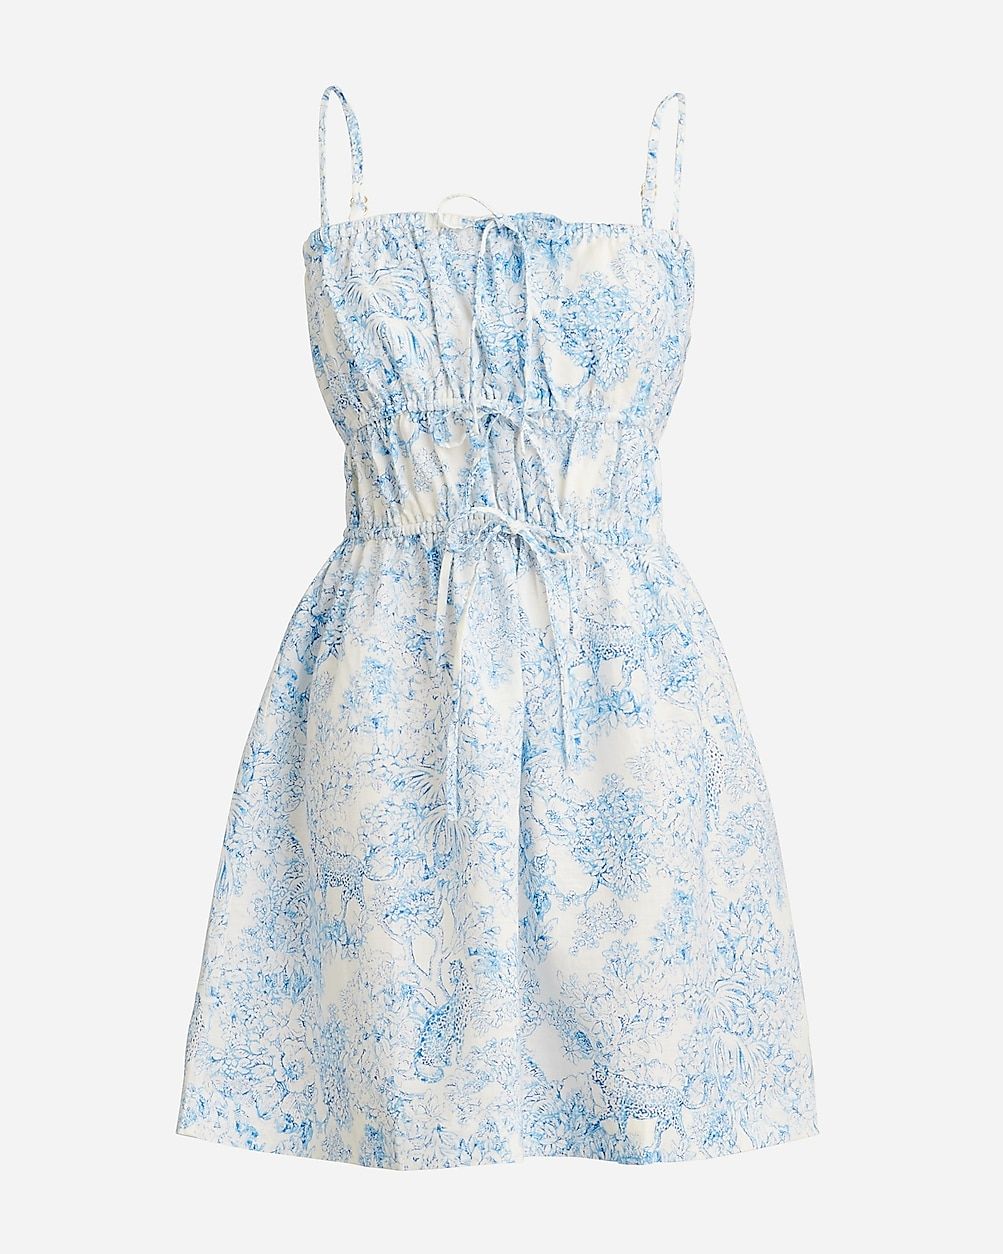 newBow-front mini dress in blue toile linen-cotton blend$128.0030% off full price with code SHOP3... | J.Crew US